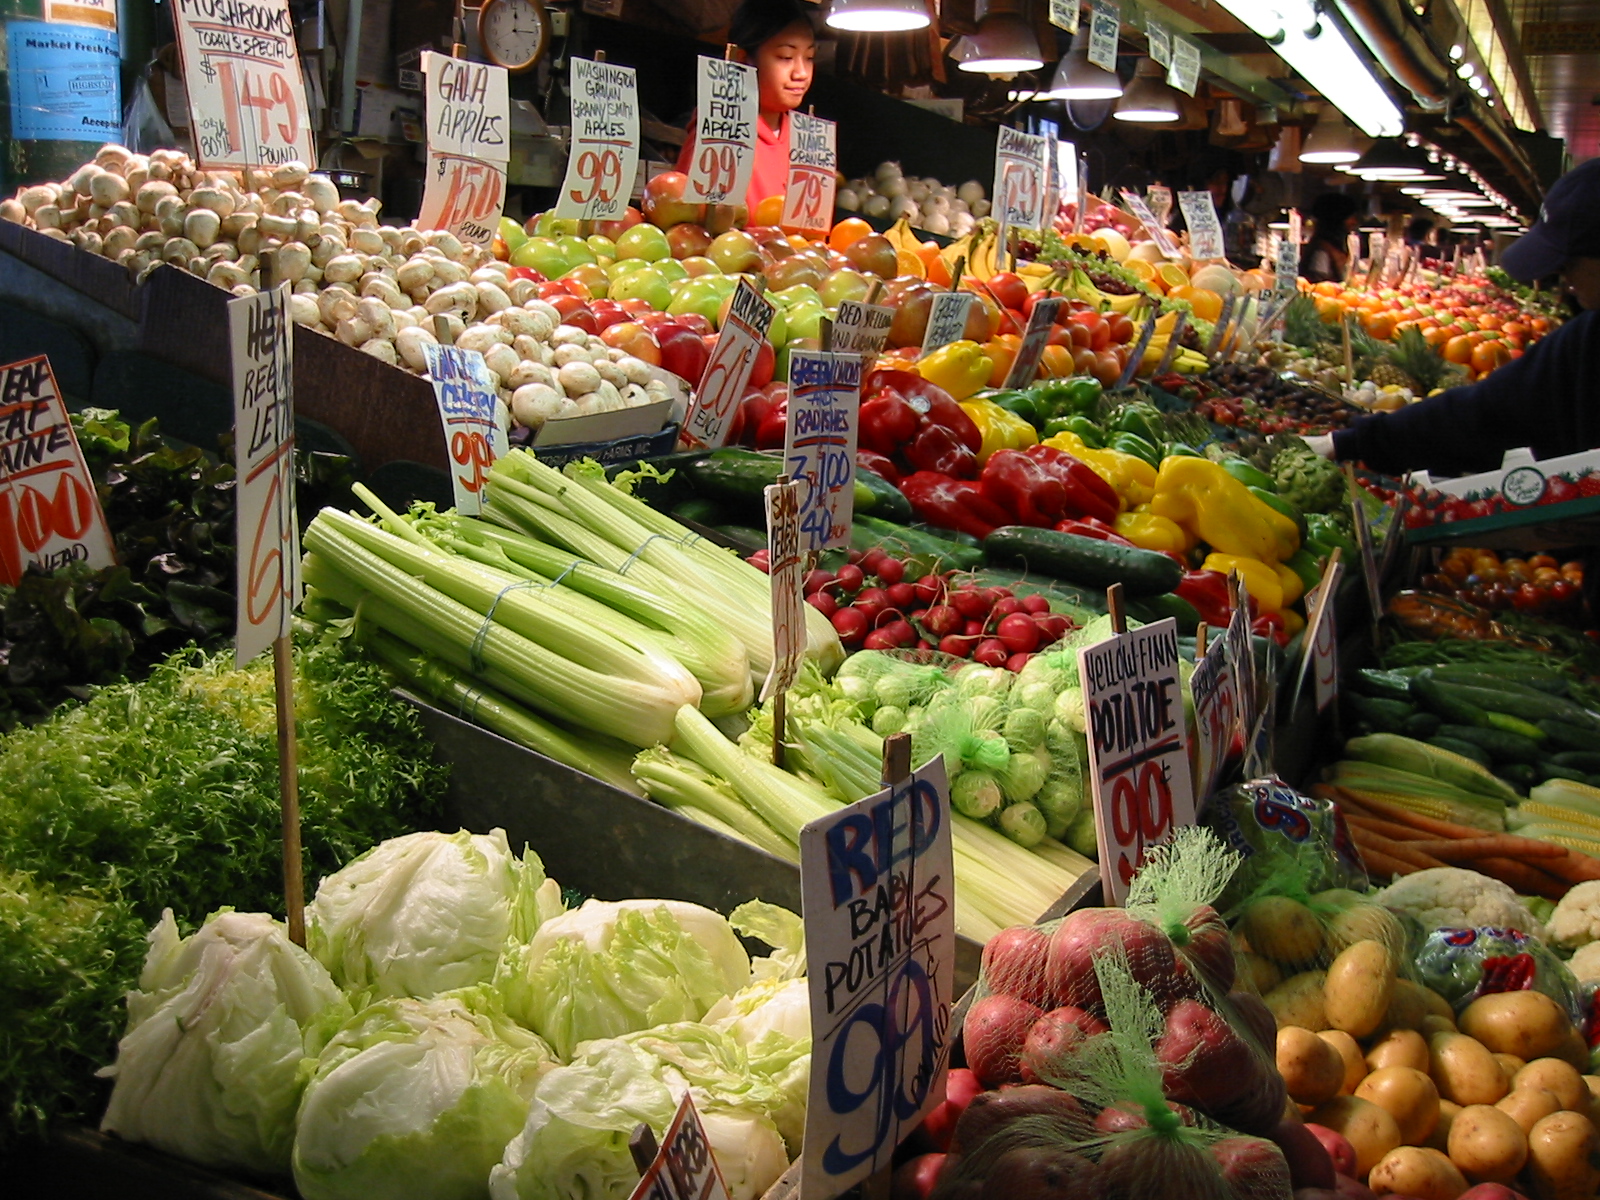 File:Fruits and Vegetables at Pike Place Market.jpg - Wikimedia Commons